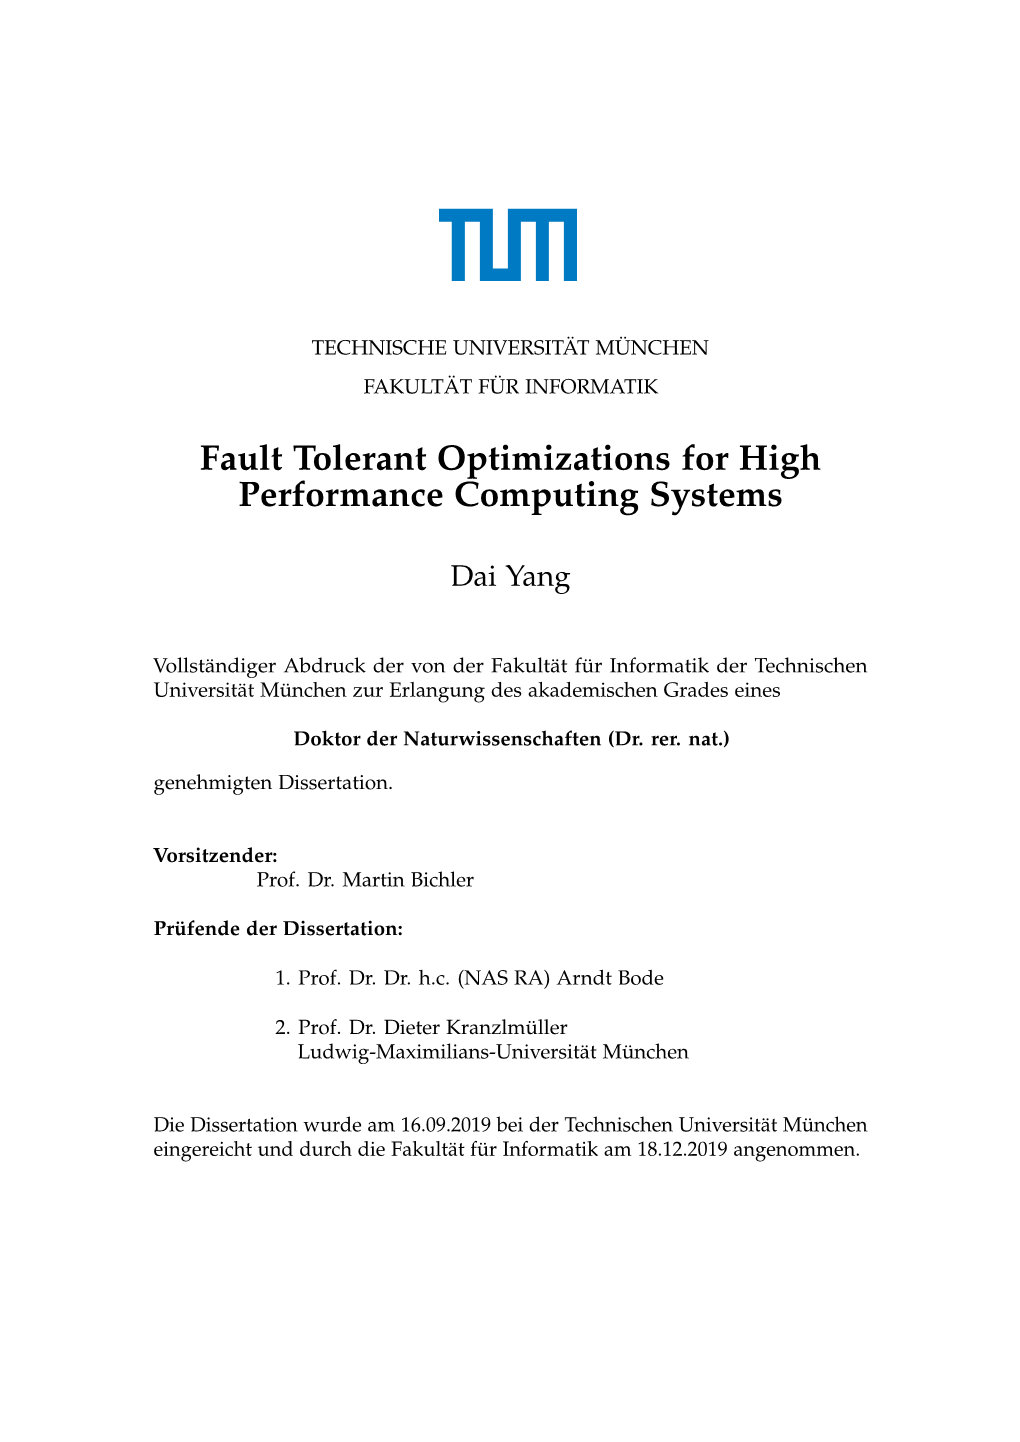 Fault Tolerant Optimizations for High Performance Computing Systems